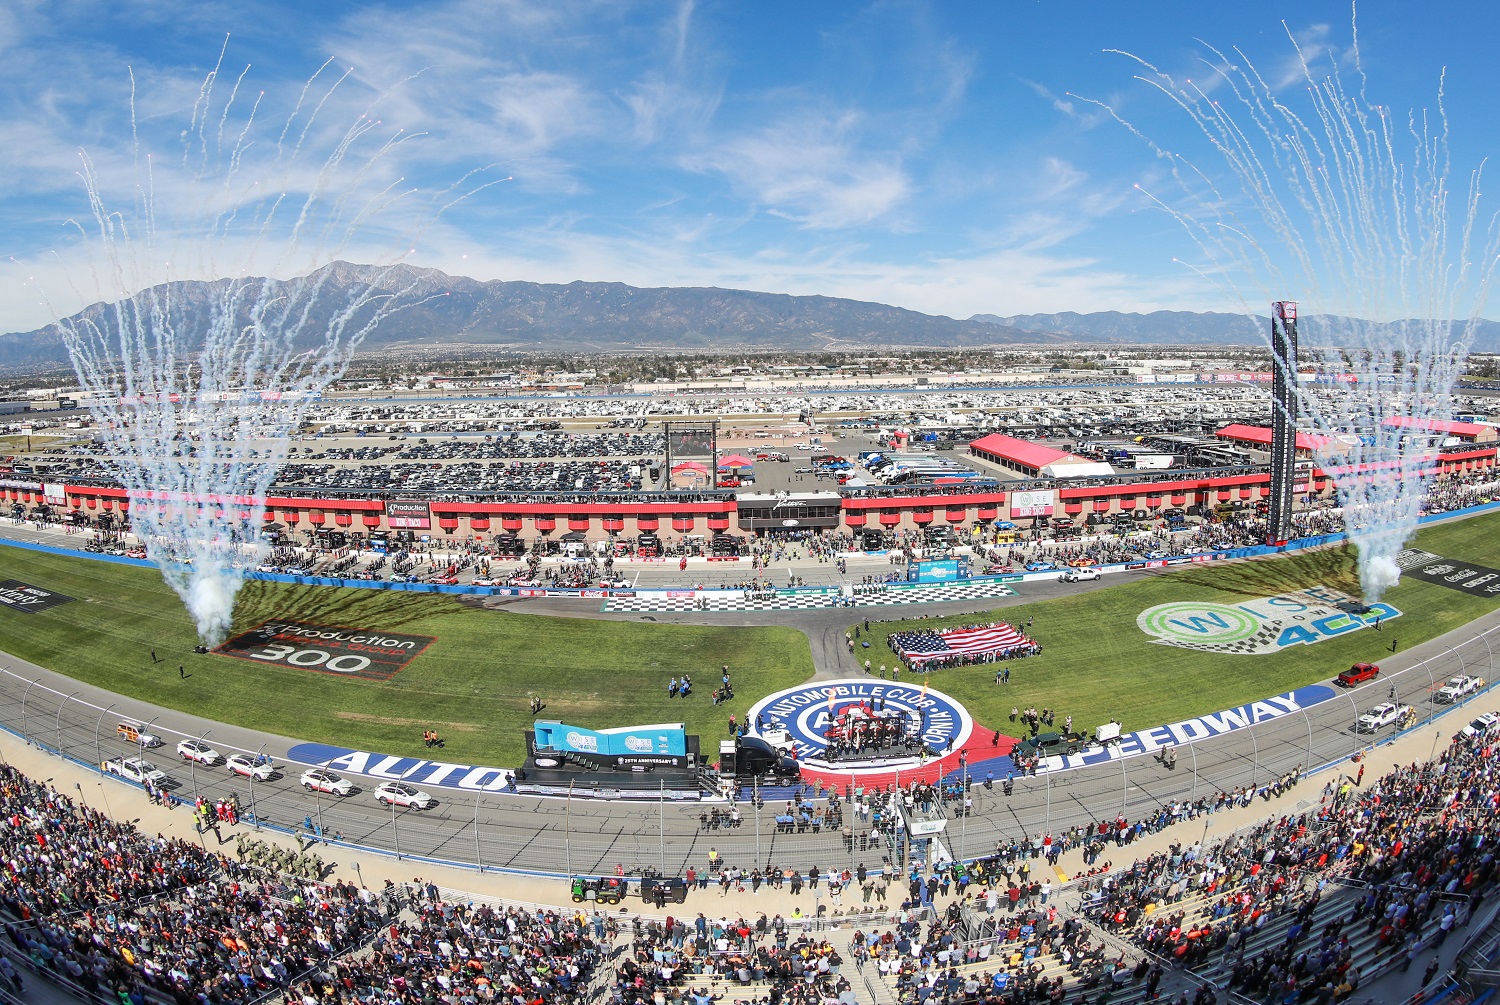 Pre-race ceremonies during the NASCAR Cup Series Wise Power 400 on Feb. 27, 2022, at Auto Club Speedway in Fontana, California.